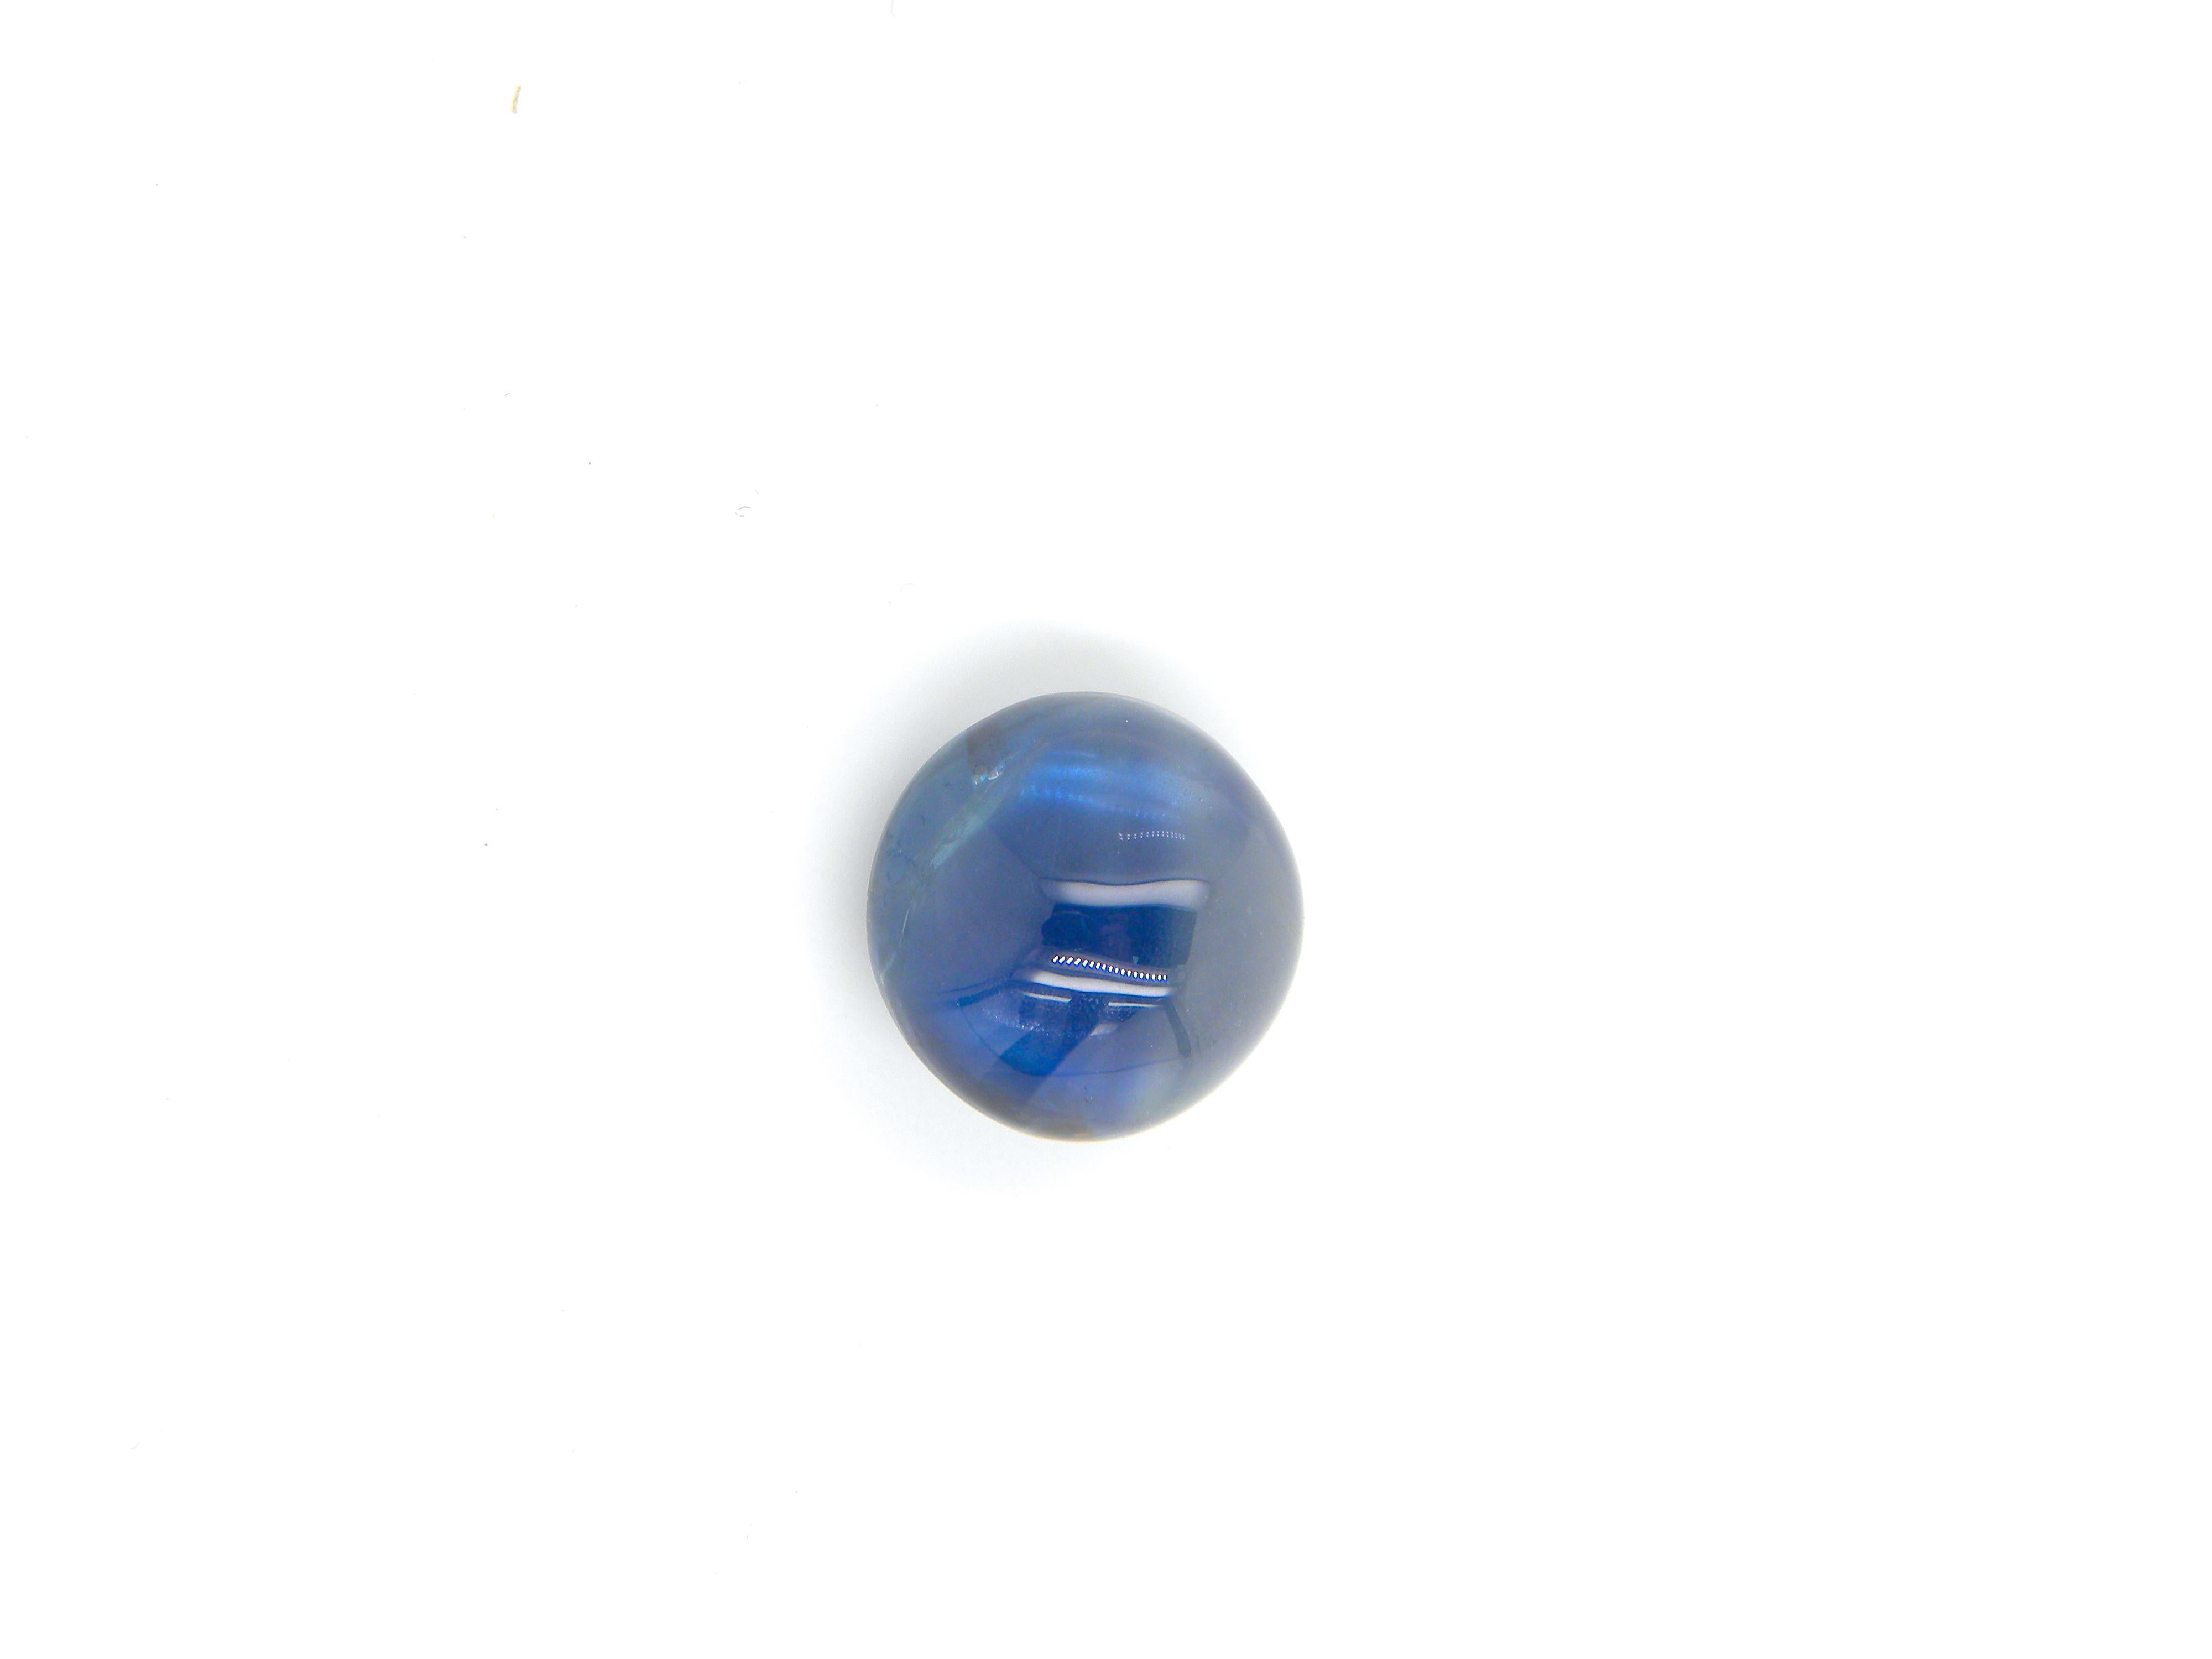 8 Carat GIA Certified Burma No Heat Blue Sapphire Cabochon:

A beautiful gem, it is a 8 carat unheated Burmese sapphire cabochon. Hailing from the historic Mogok mines in Burma, the sapphire possesses a royal blue colour saturation, with great